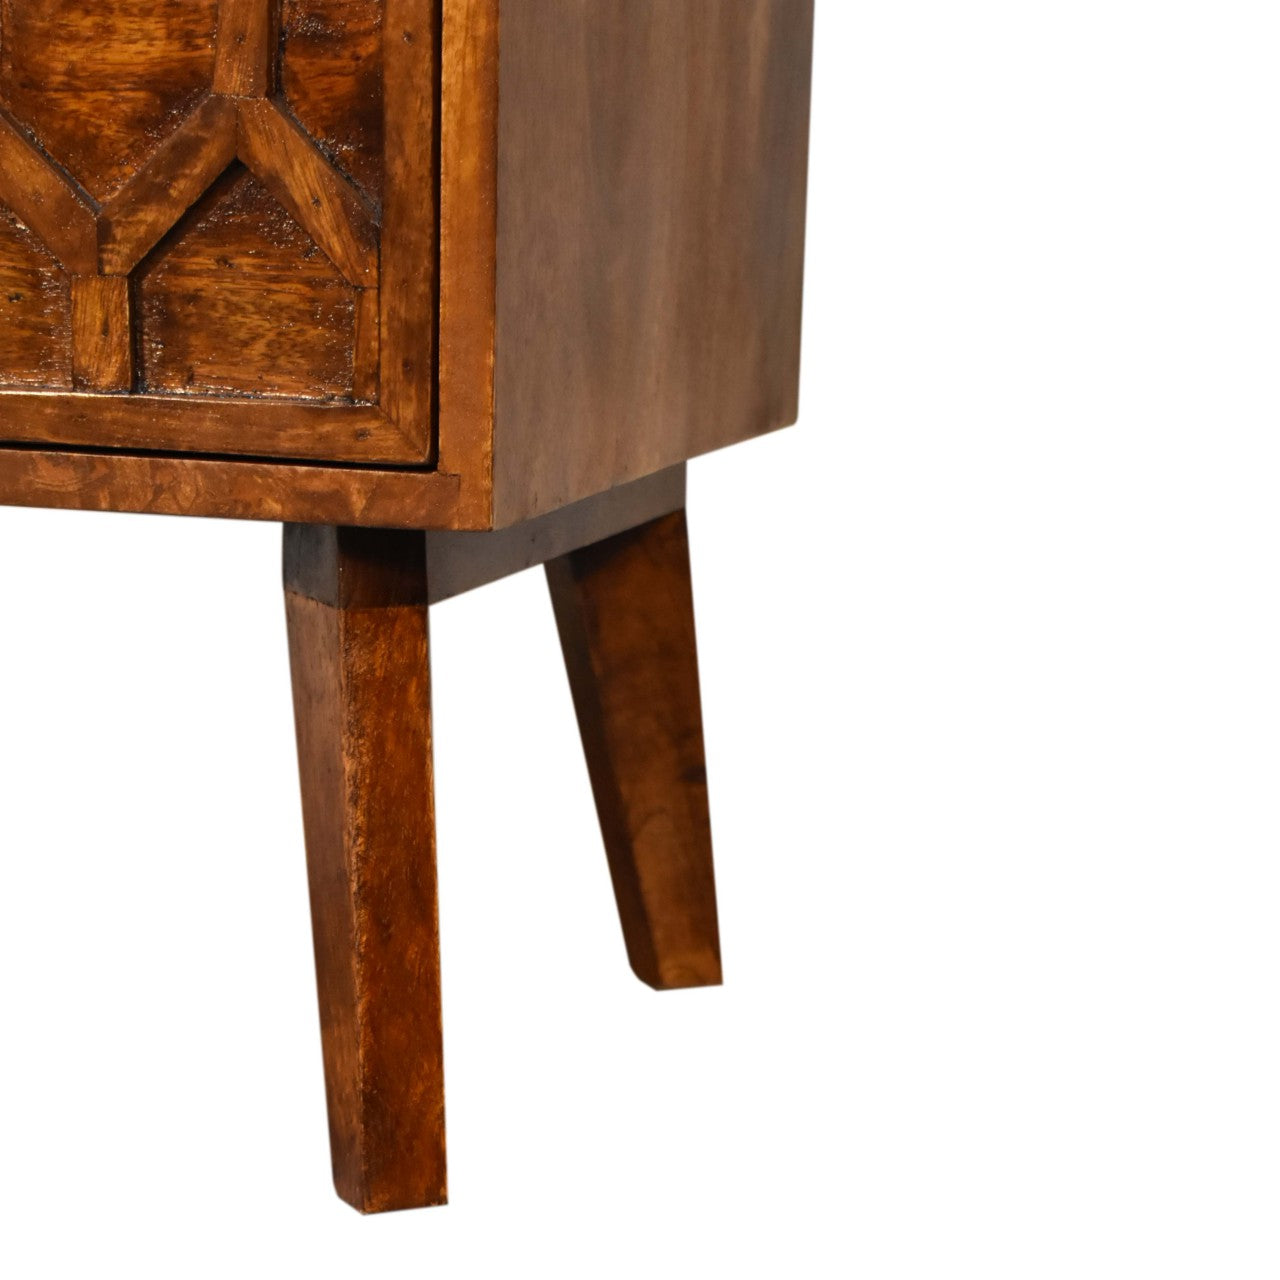 Amouri Bedside Table 2 Drawer Chest in Chestnut Finish Over SOlid Mango Wood - CasaFenix